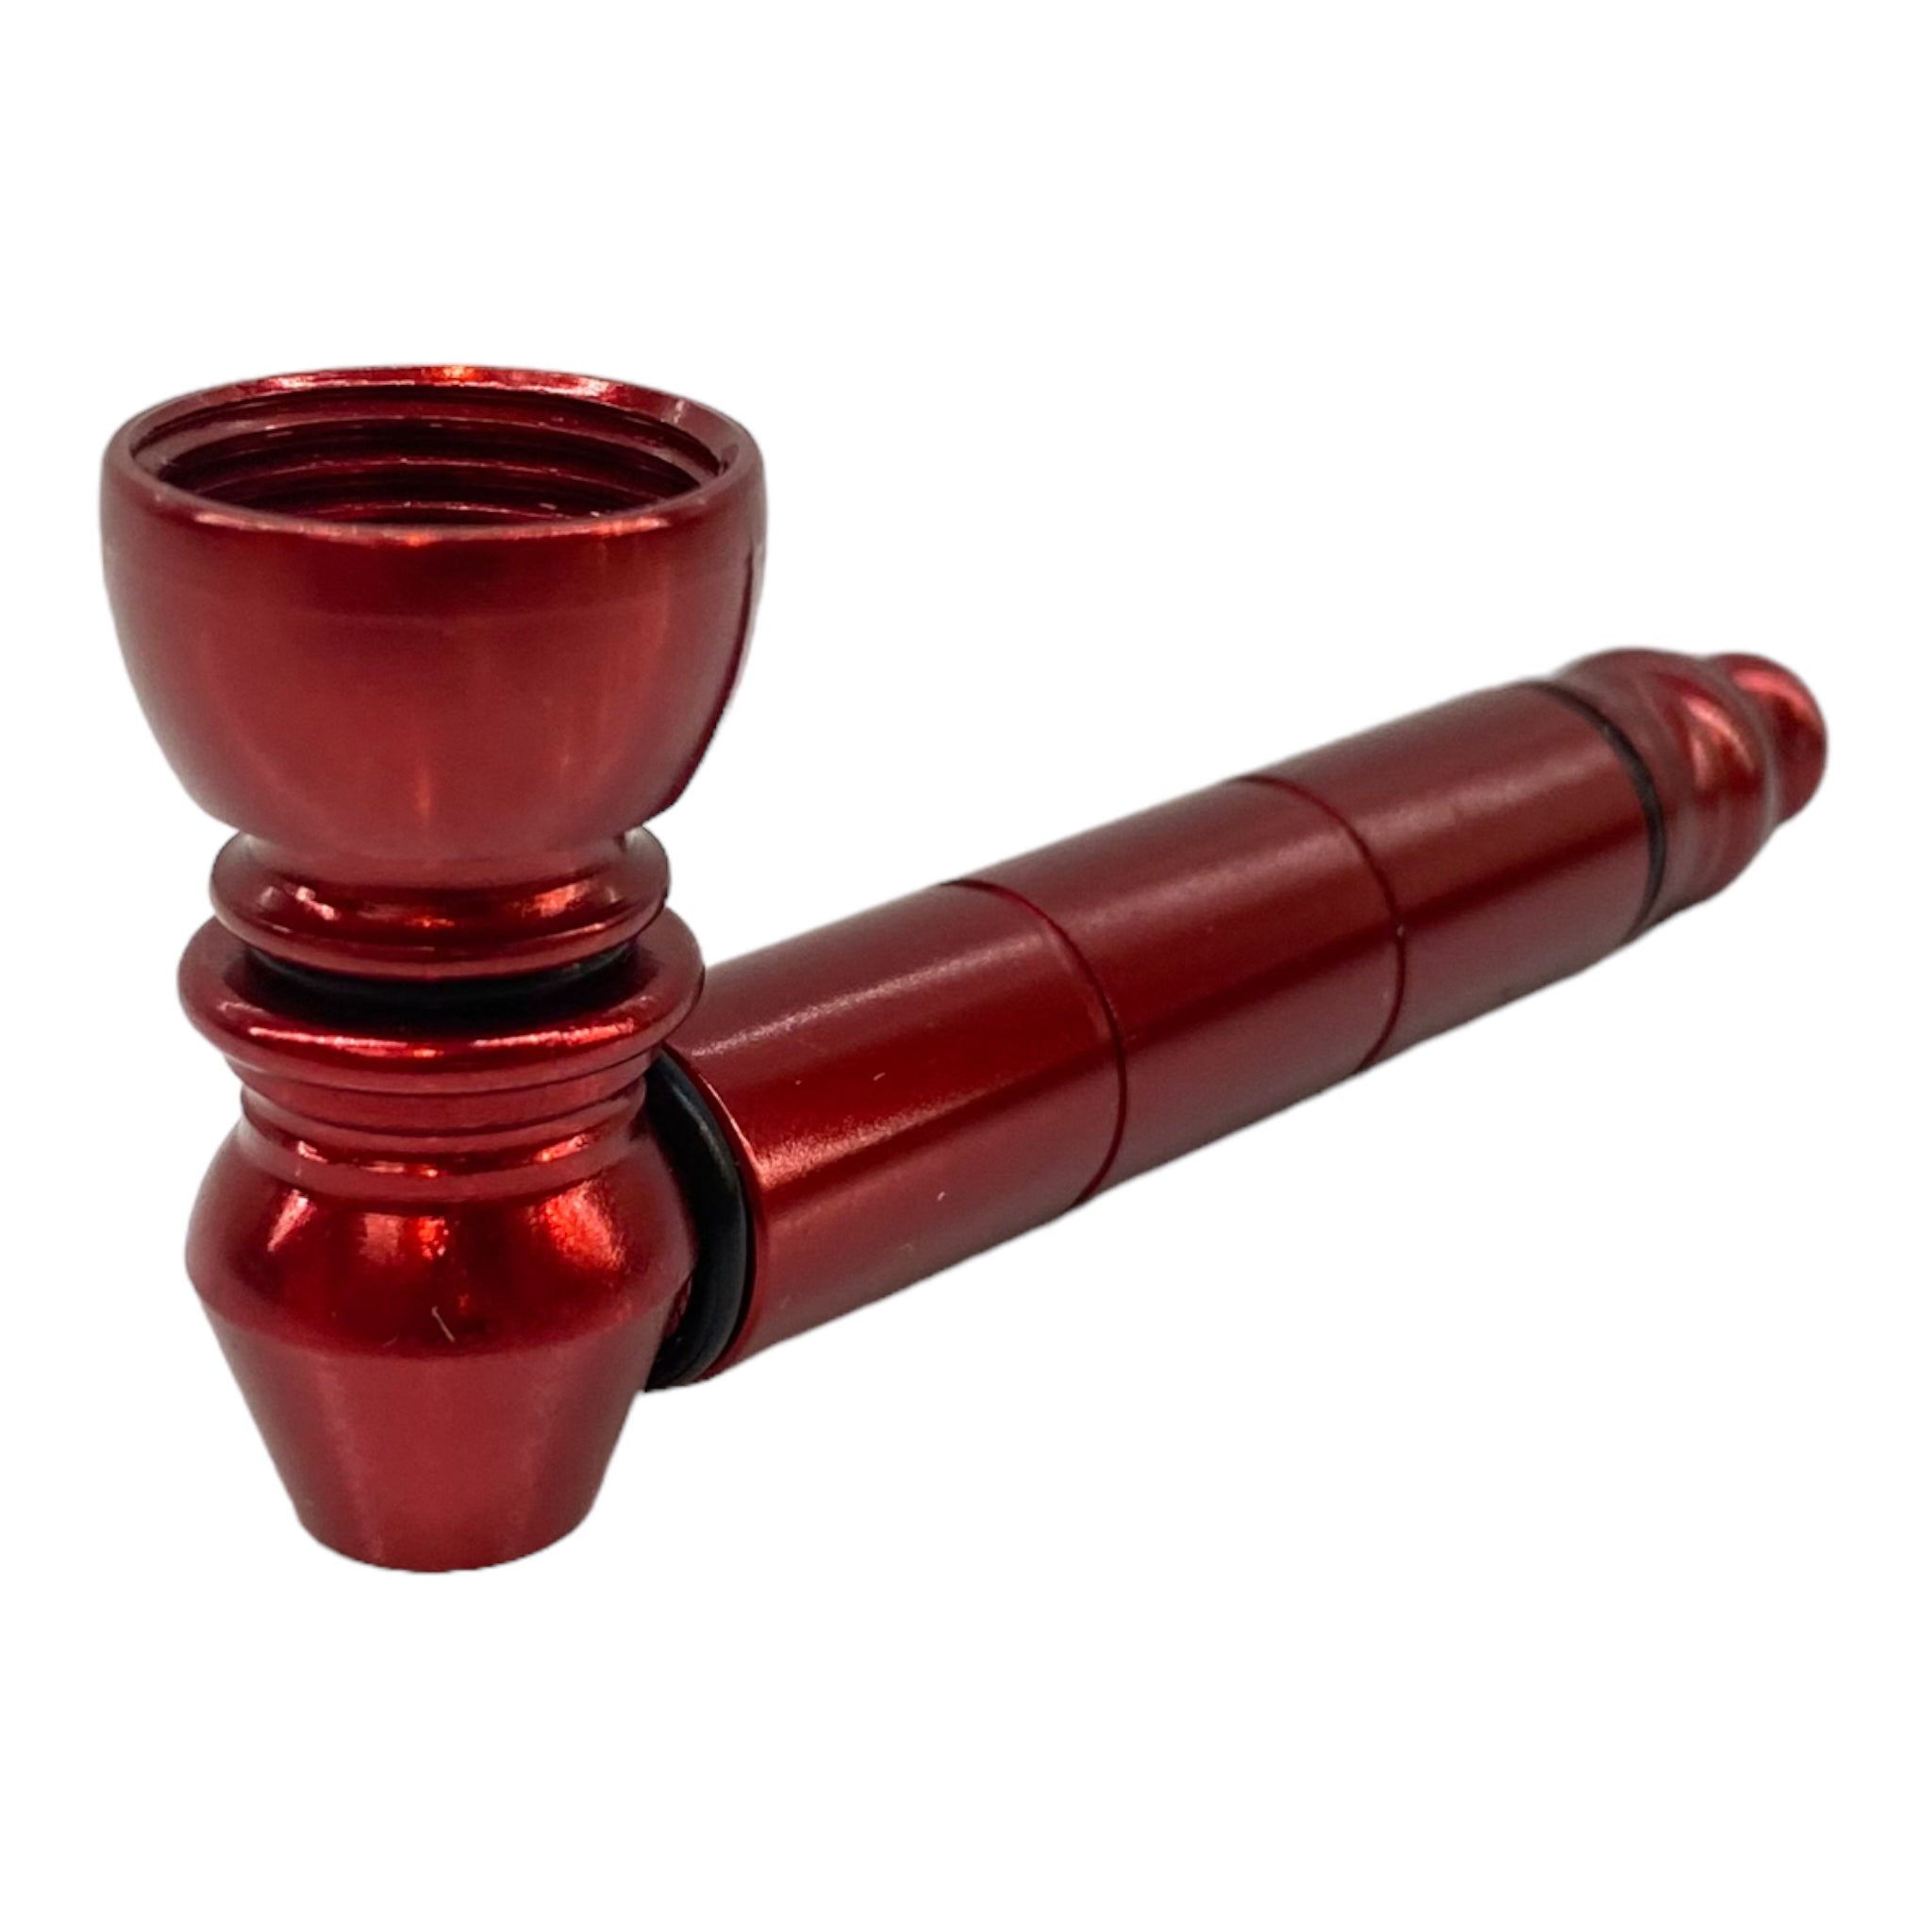 Metal weed and tobbaco pipe red basic metal pipe with small chamber for sale free shipping